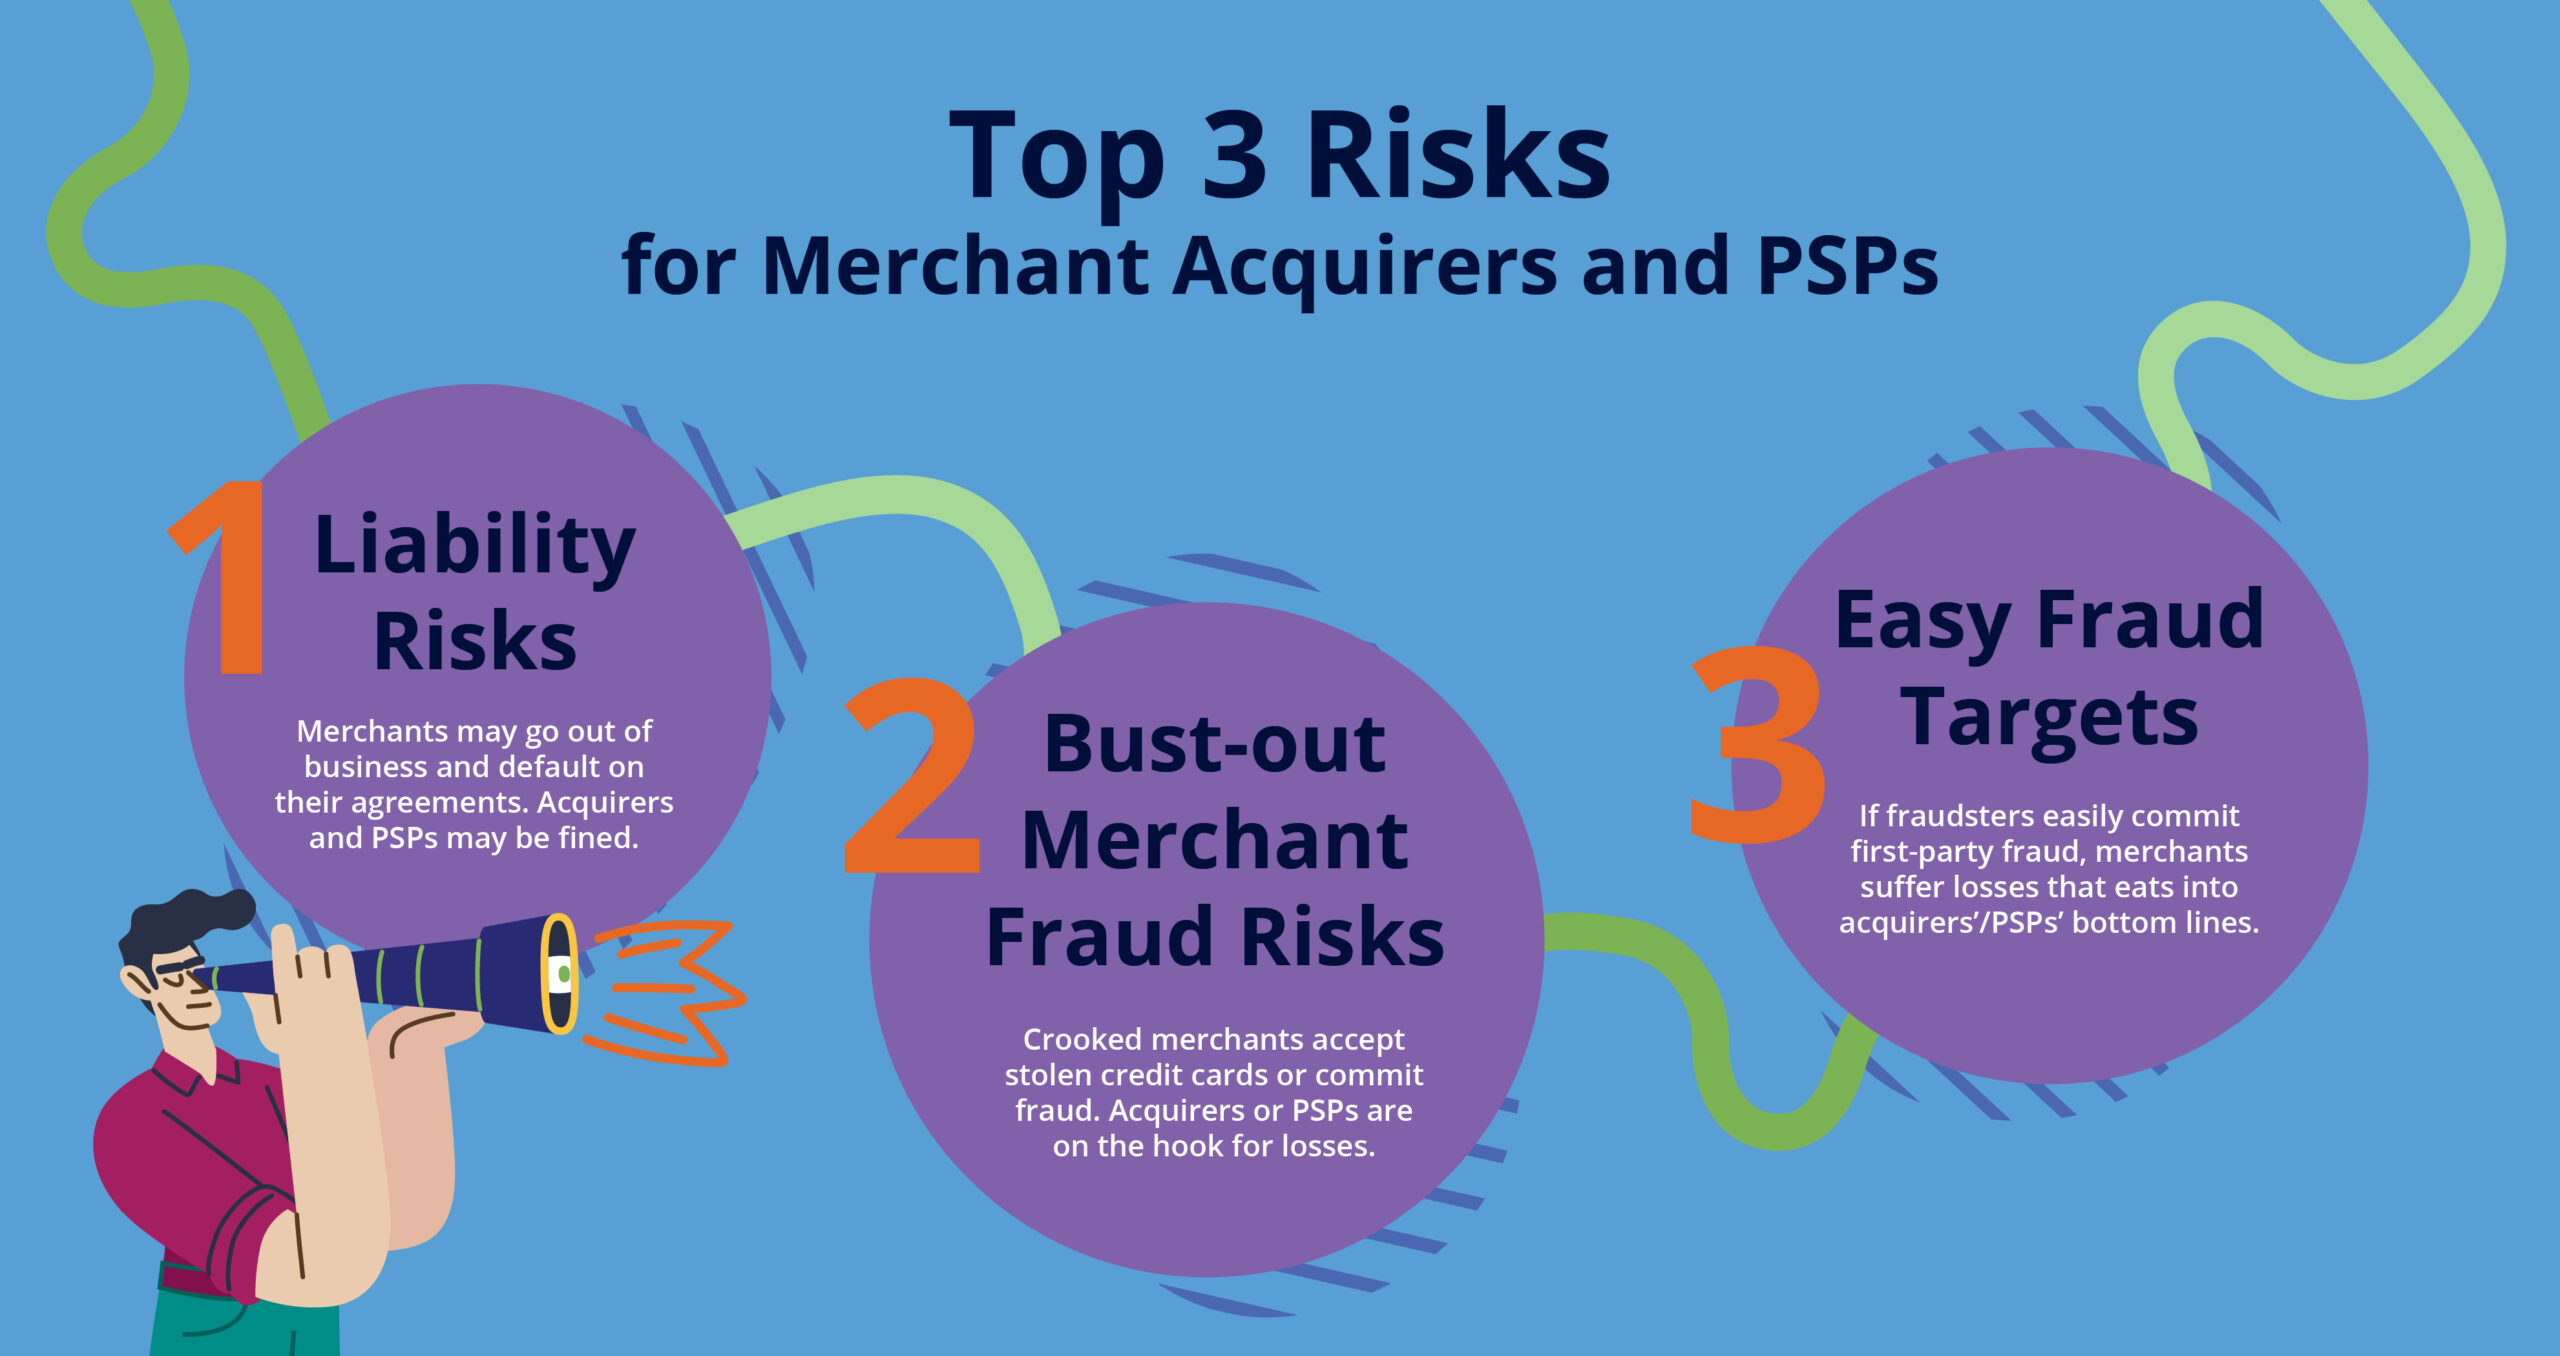 Illustration detailing Top 3 Risks for Merchant Acquirers and PSPs